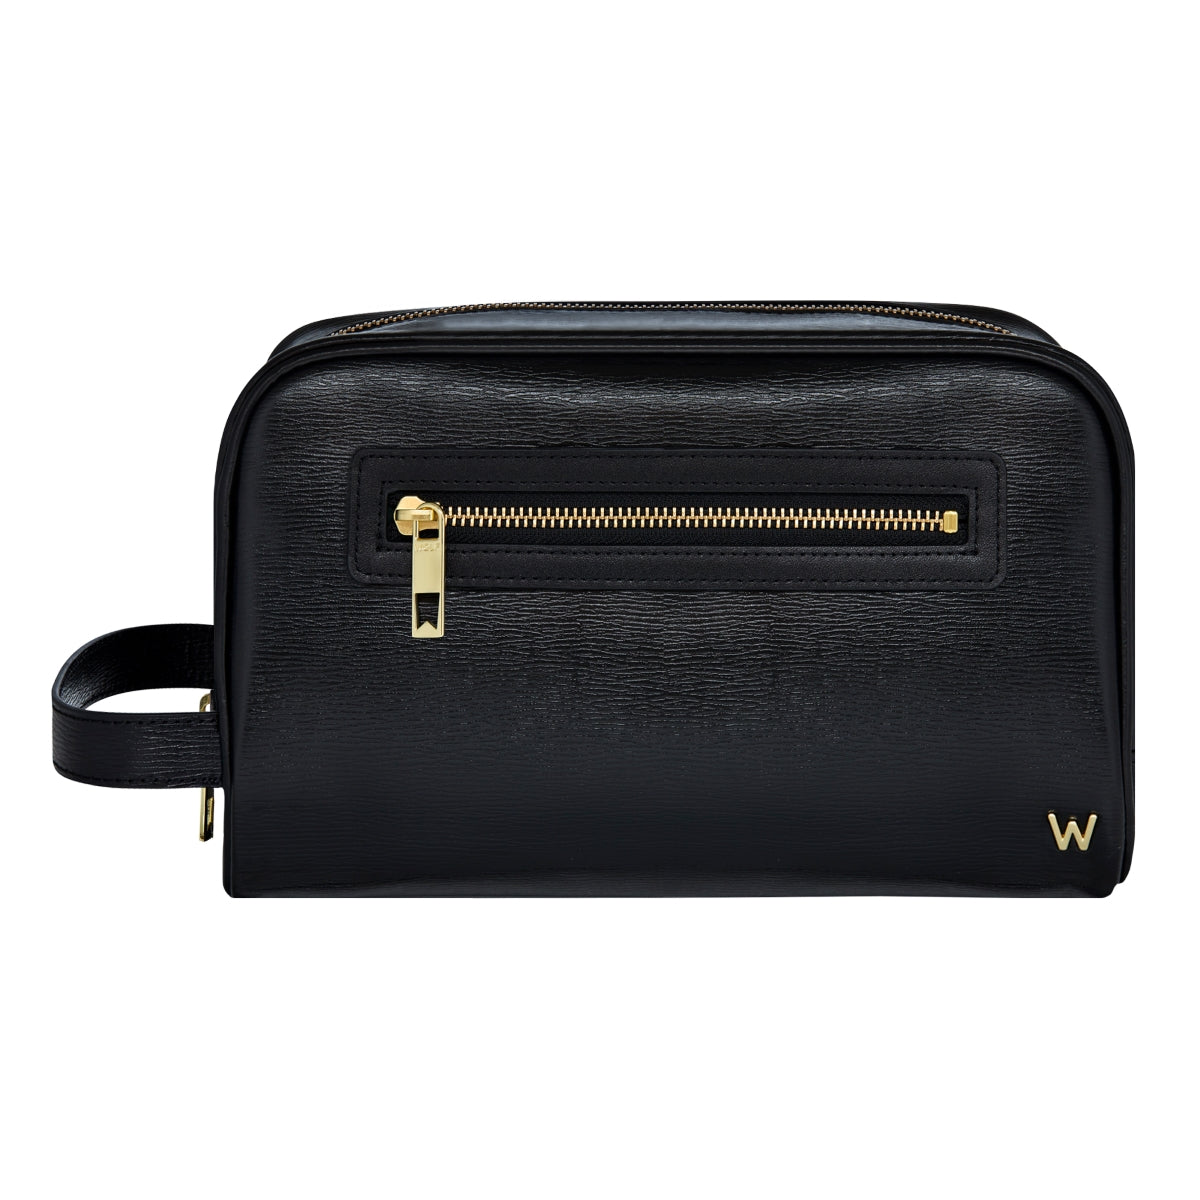 Wolf W Collection Leather Black Washbag - Black